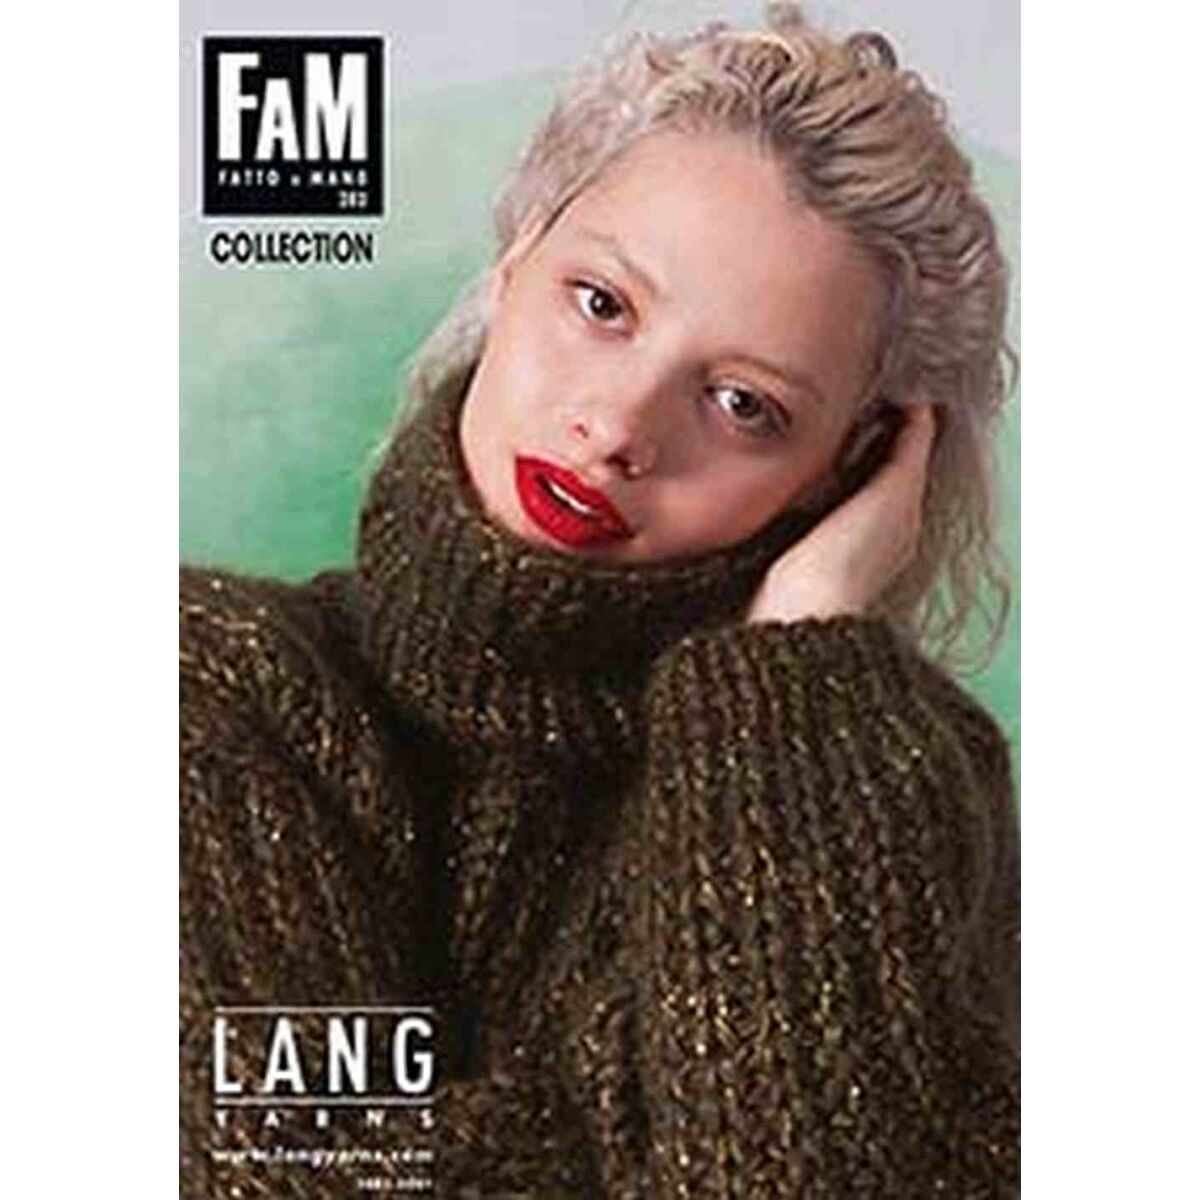 LANG YARNS FAM 282 COLLECTION LY.20850001 Zeitschriften